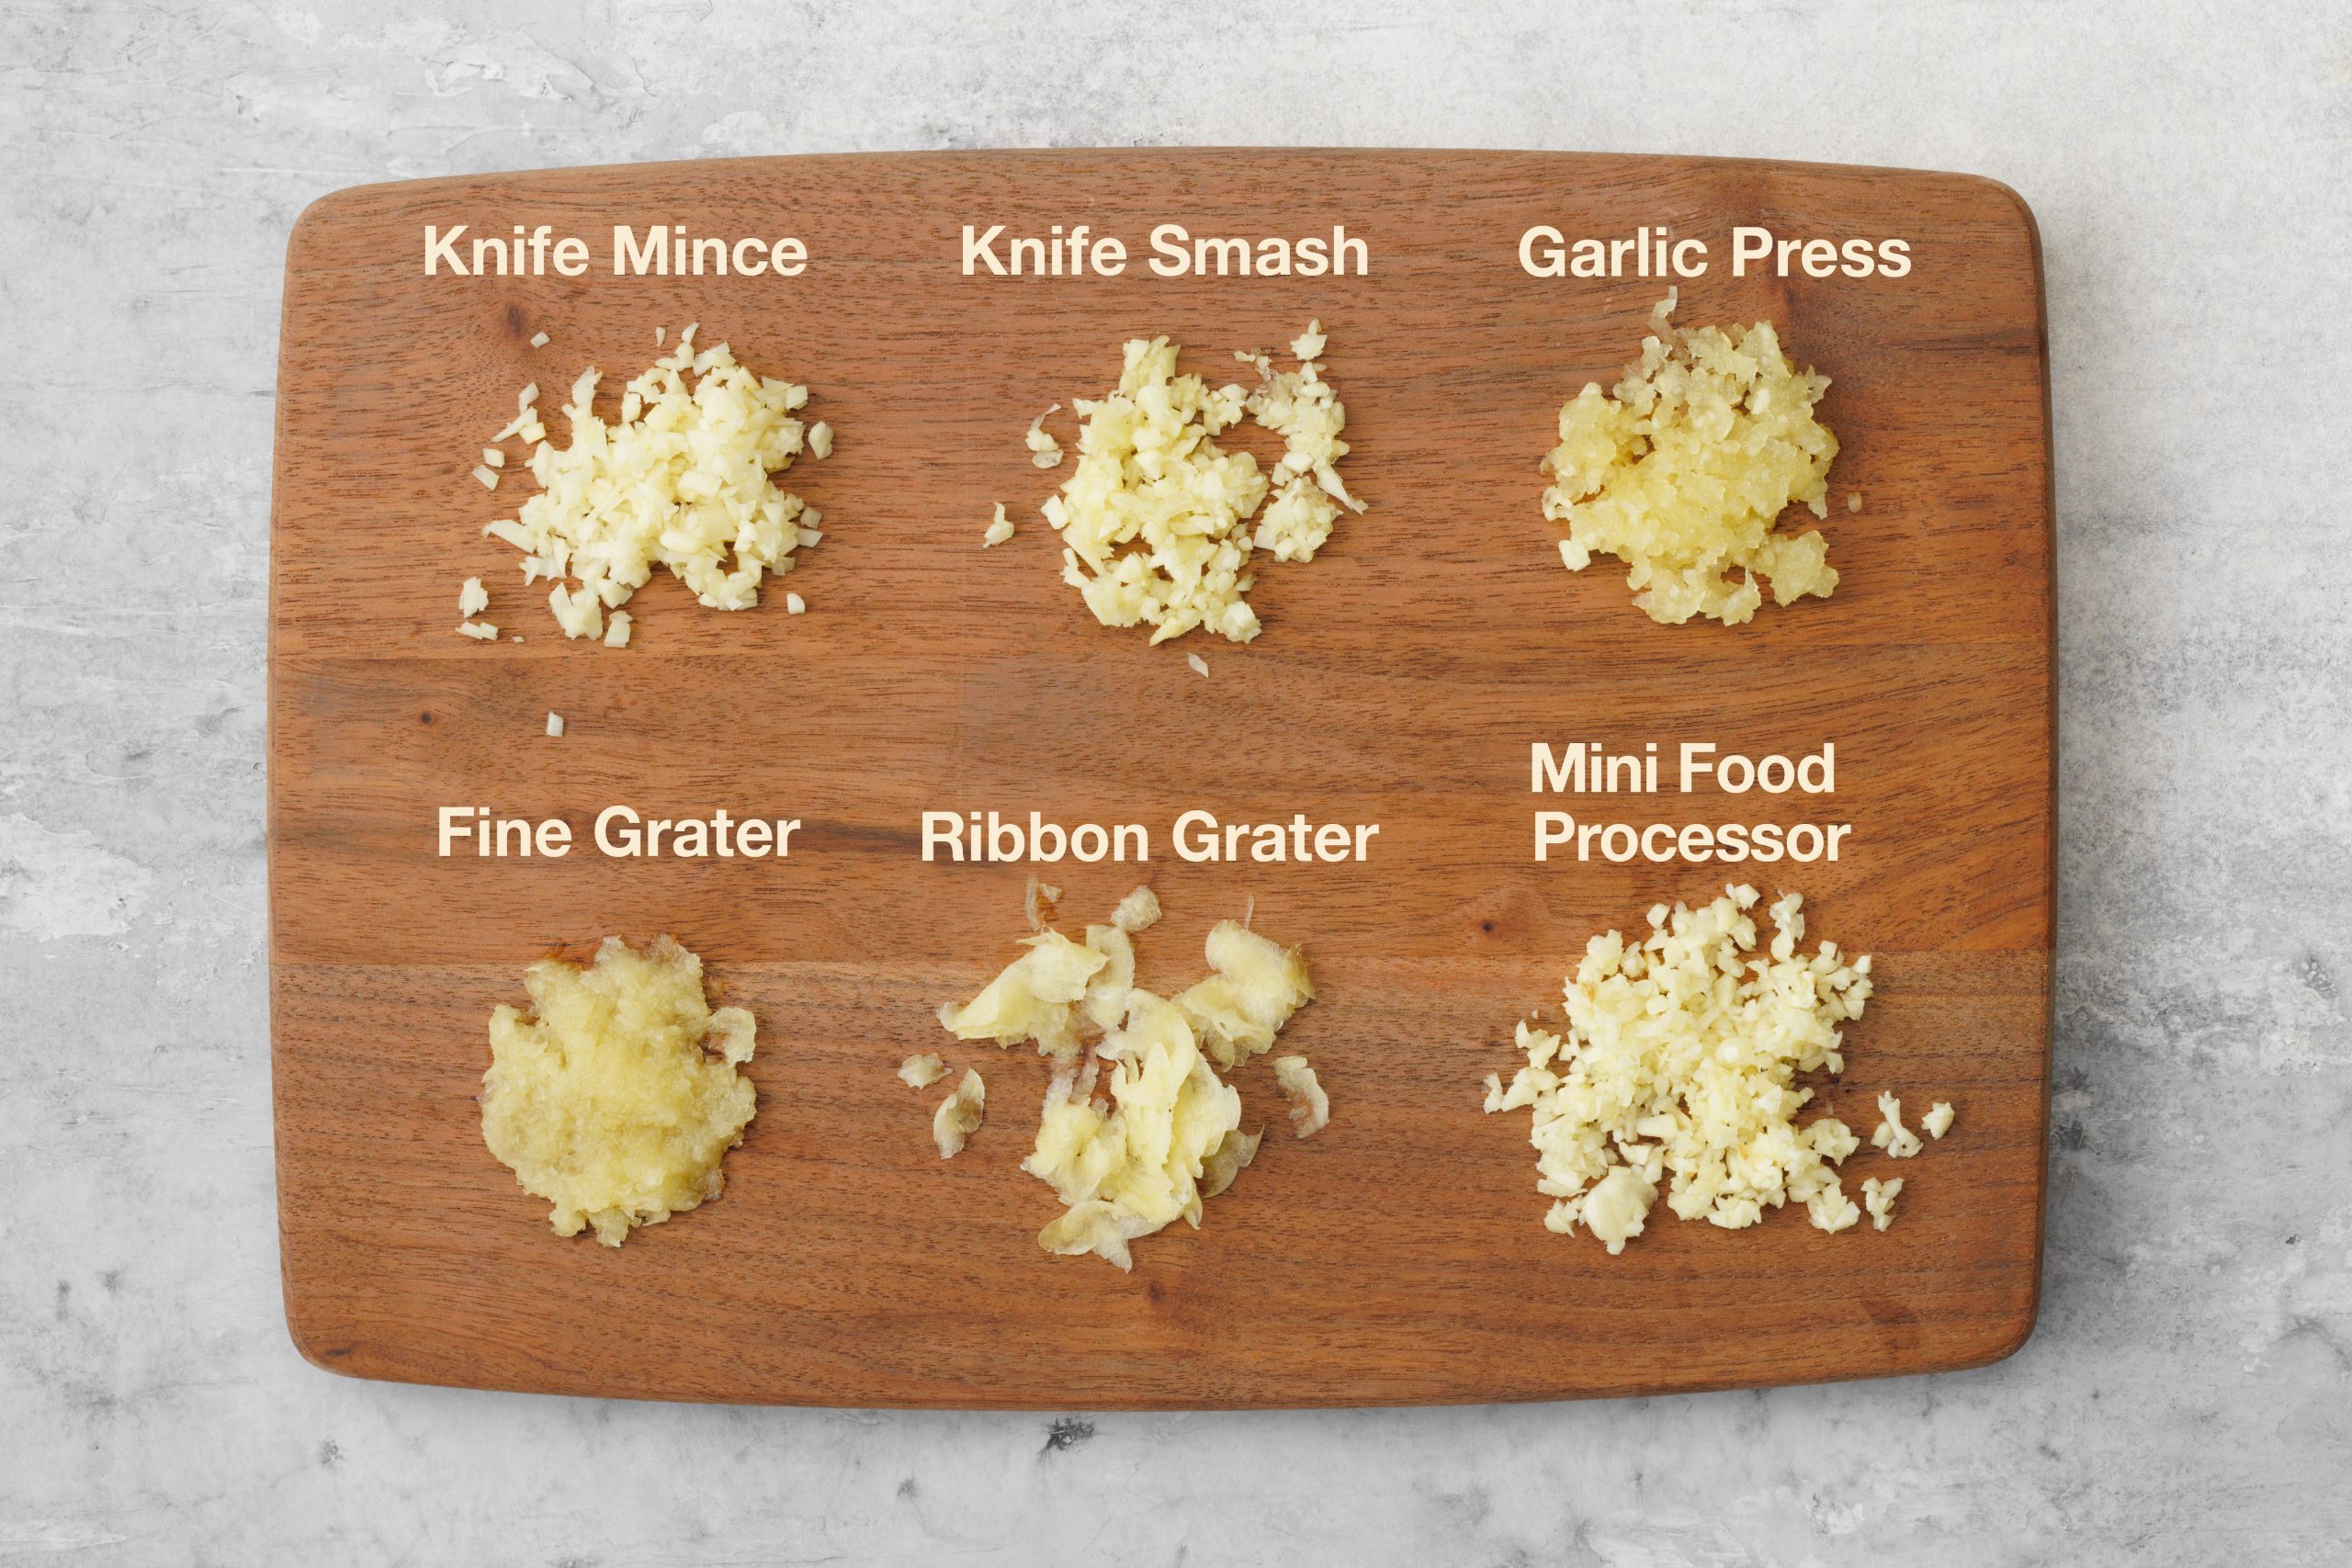 I need this garlic grater plate. Next levels your bread for sure